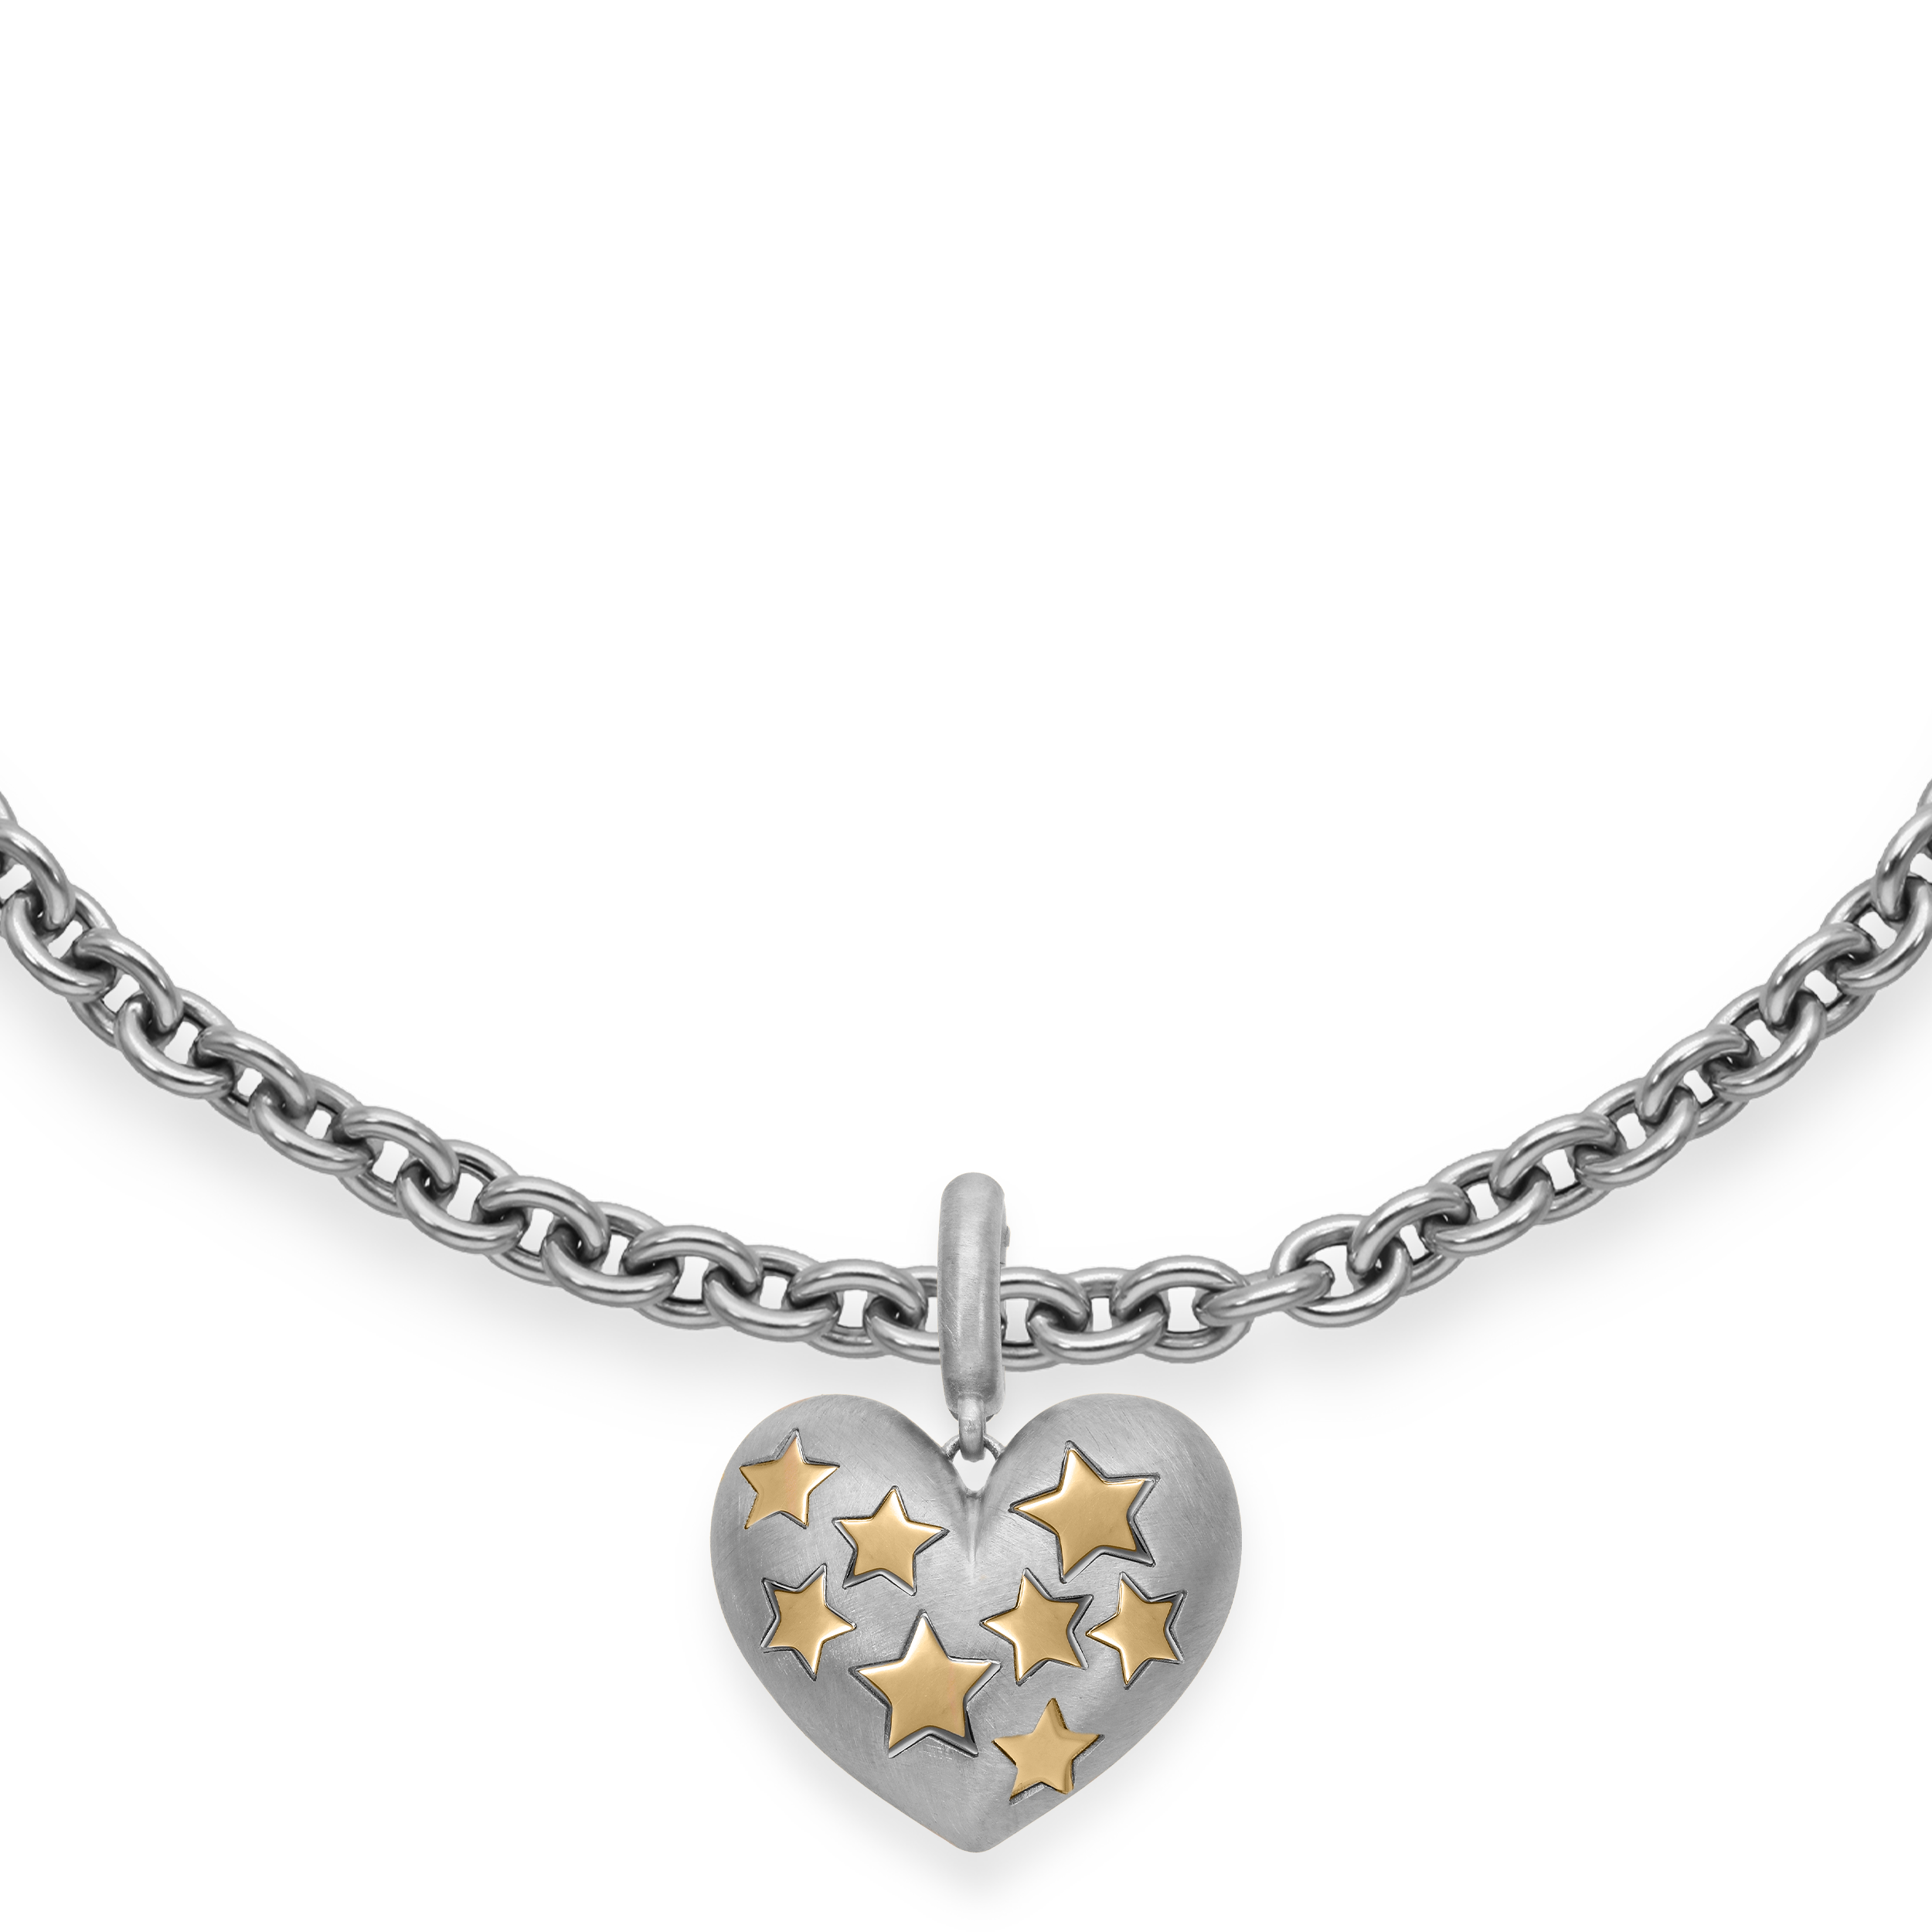 Paulette Brushed White Gold Baby Heart with Yellow Gold Stars Pendant on Necklace